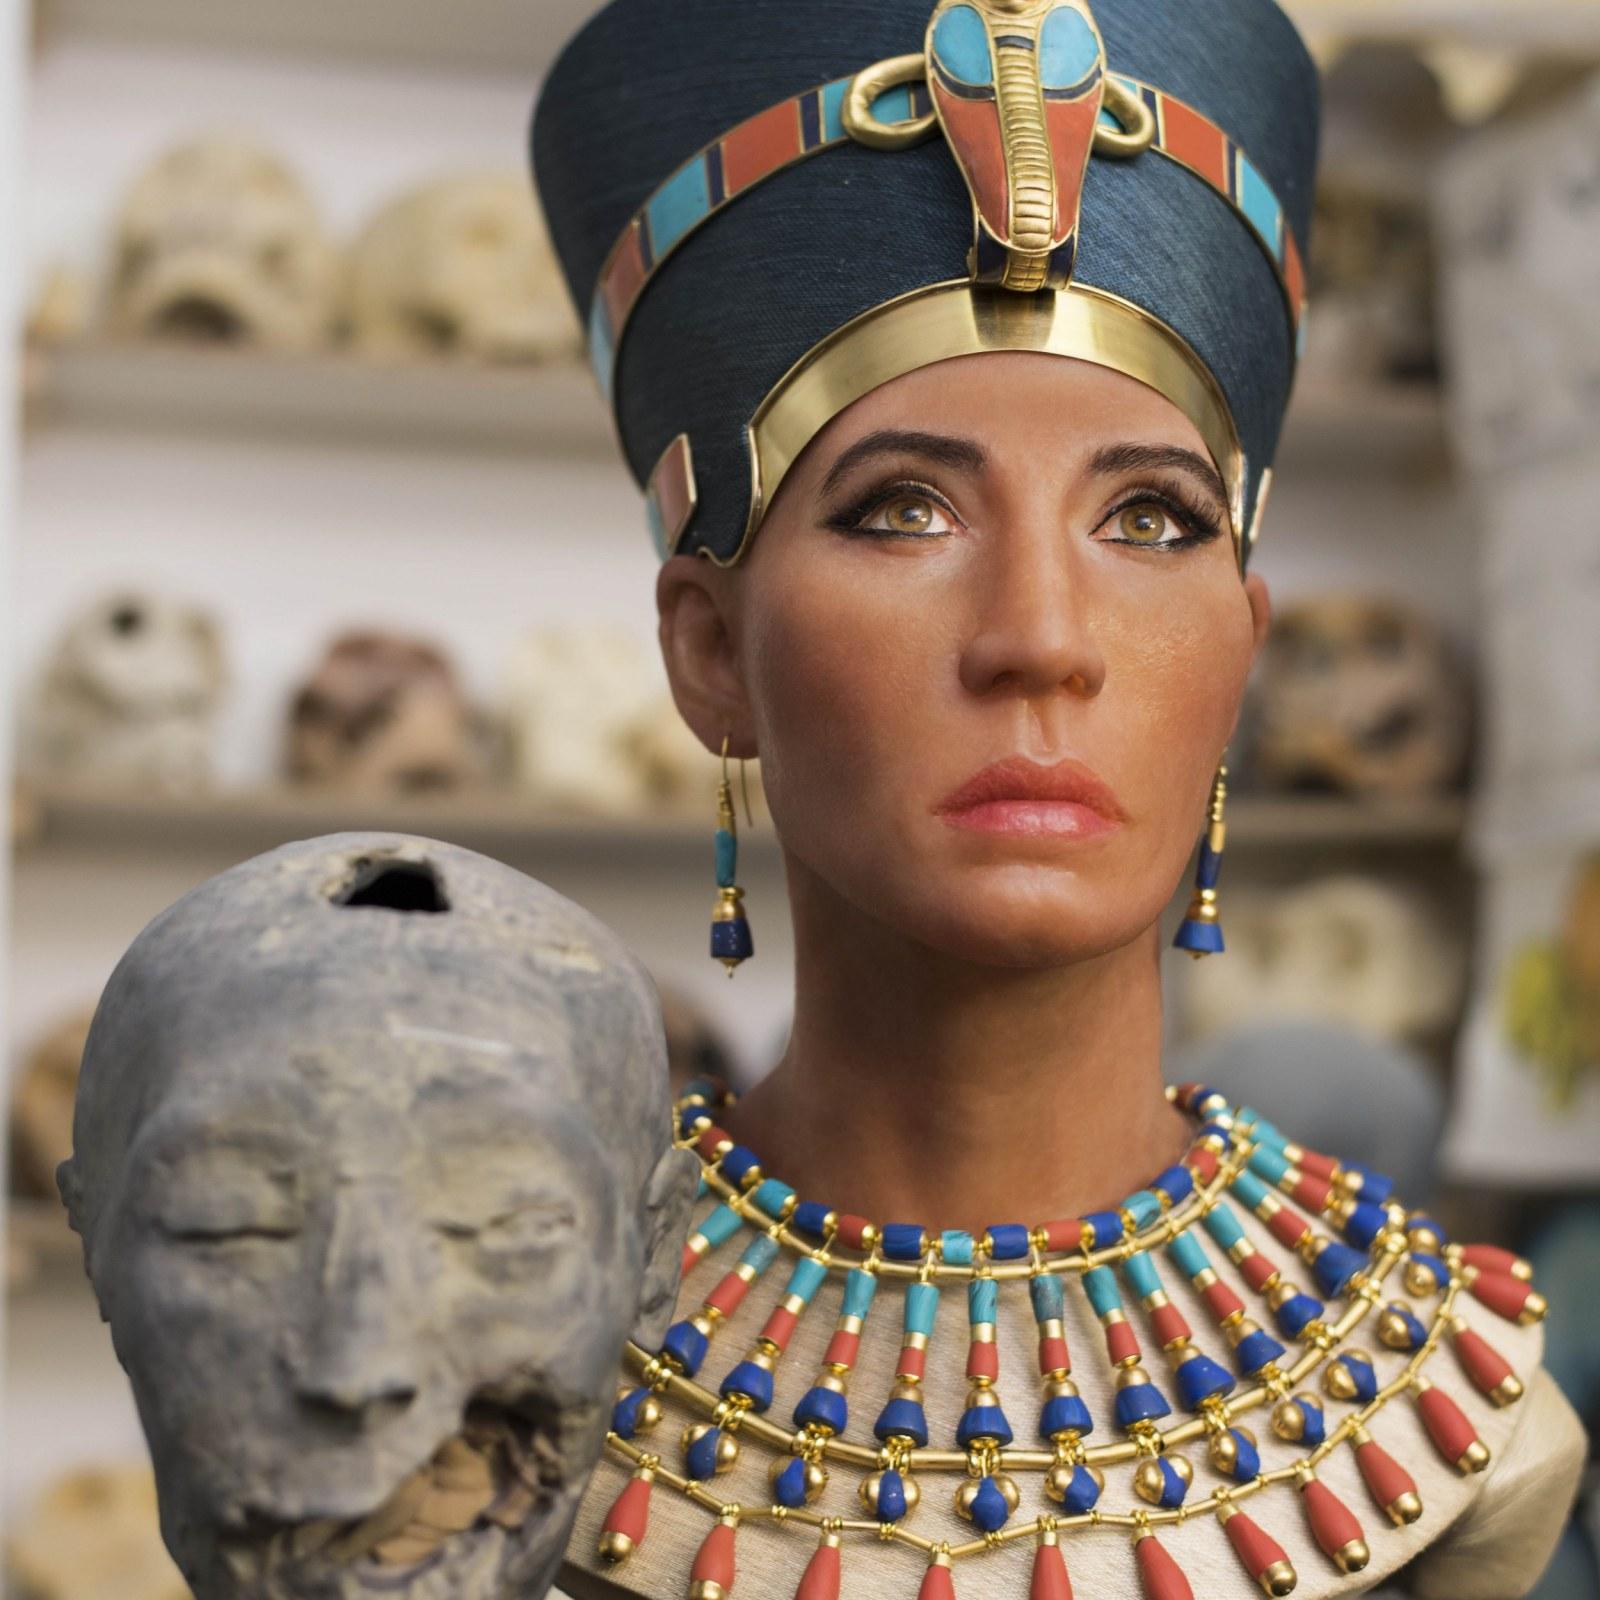 Ancient Egypt: Mummy of Queen Nefertiti Brought to Life With